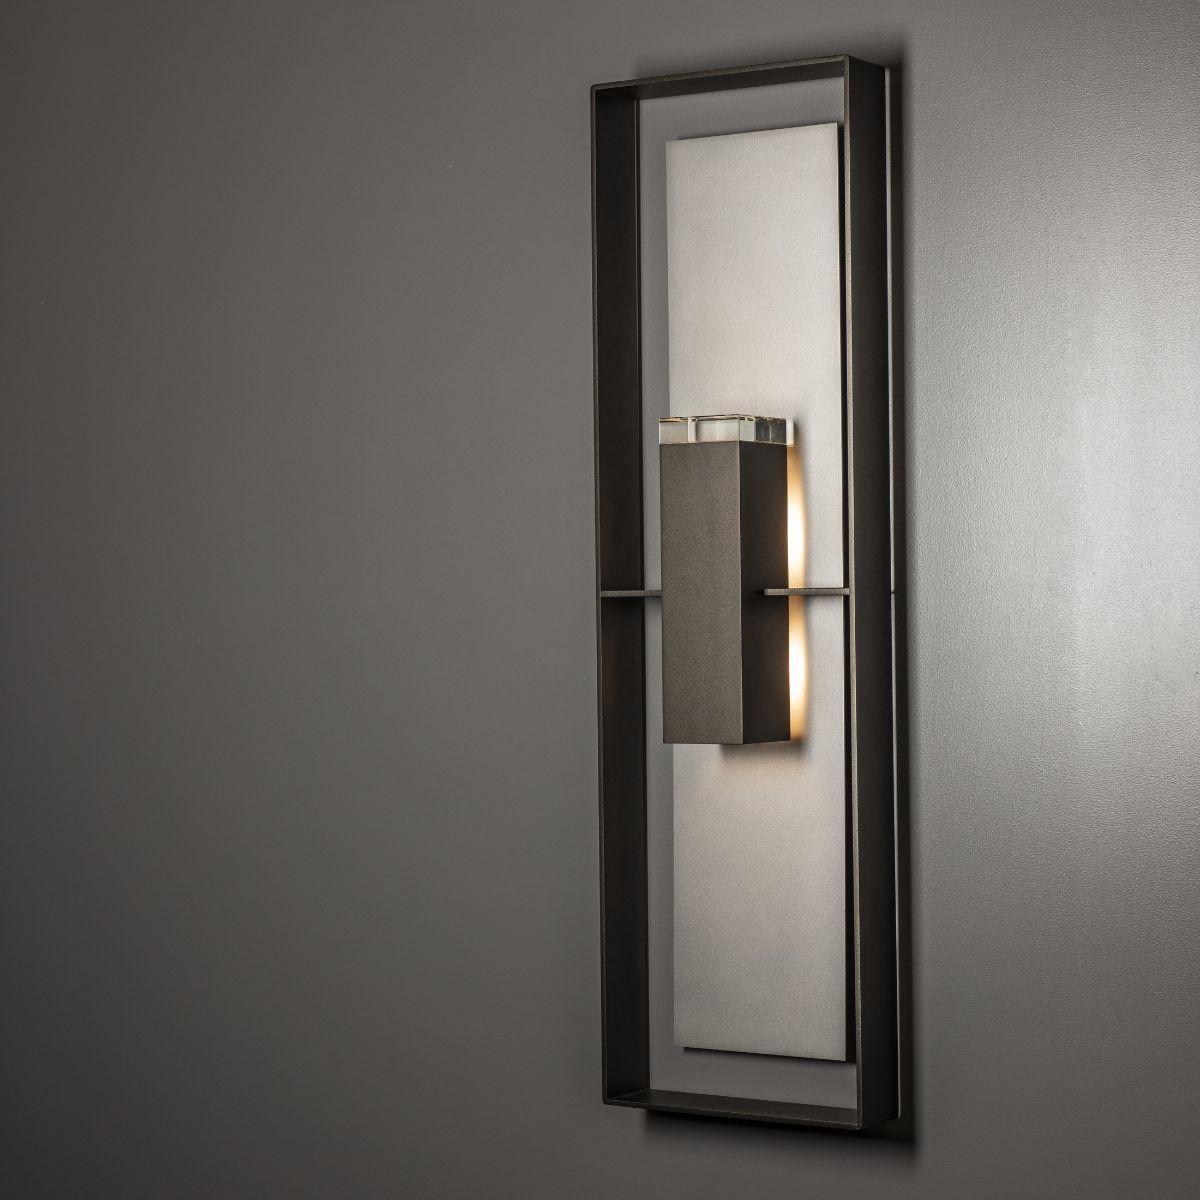 Shadow Box 45 In. 2 lights Outdoor Wall Sconce